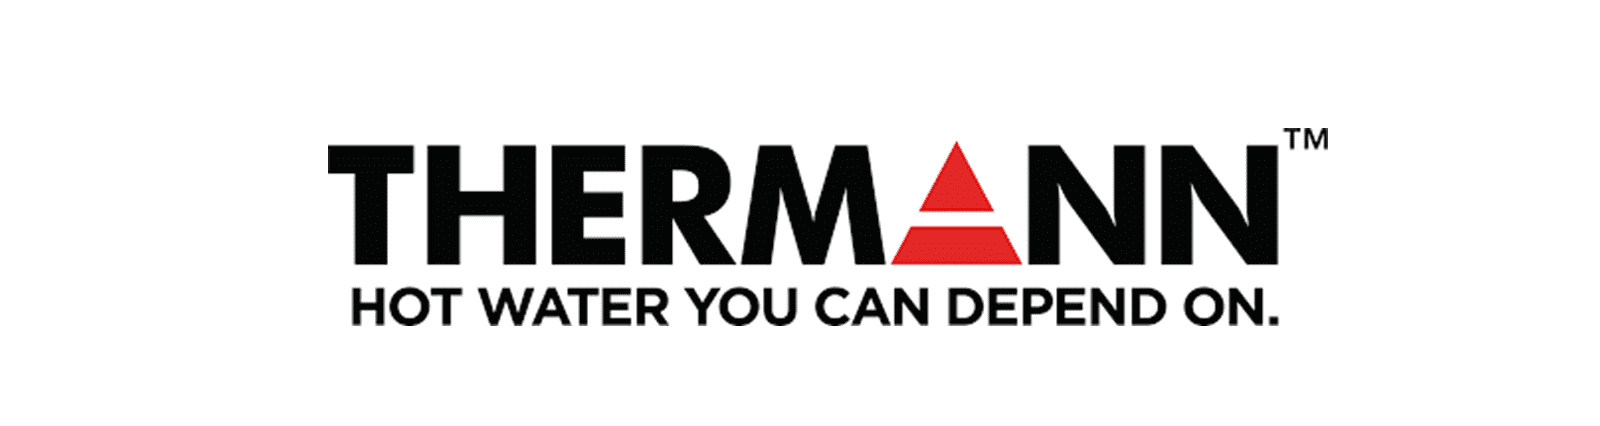 Thermann hot water logo